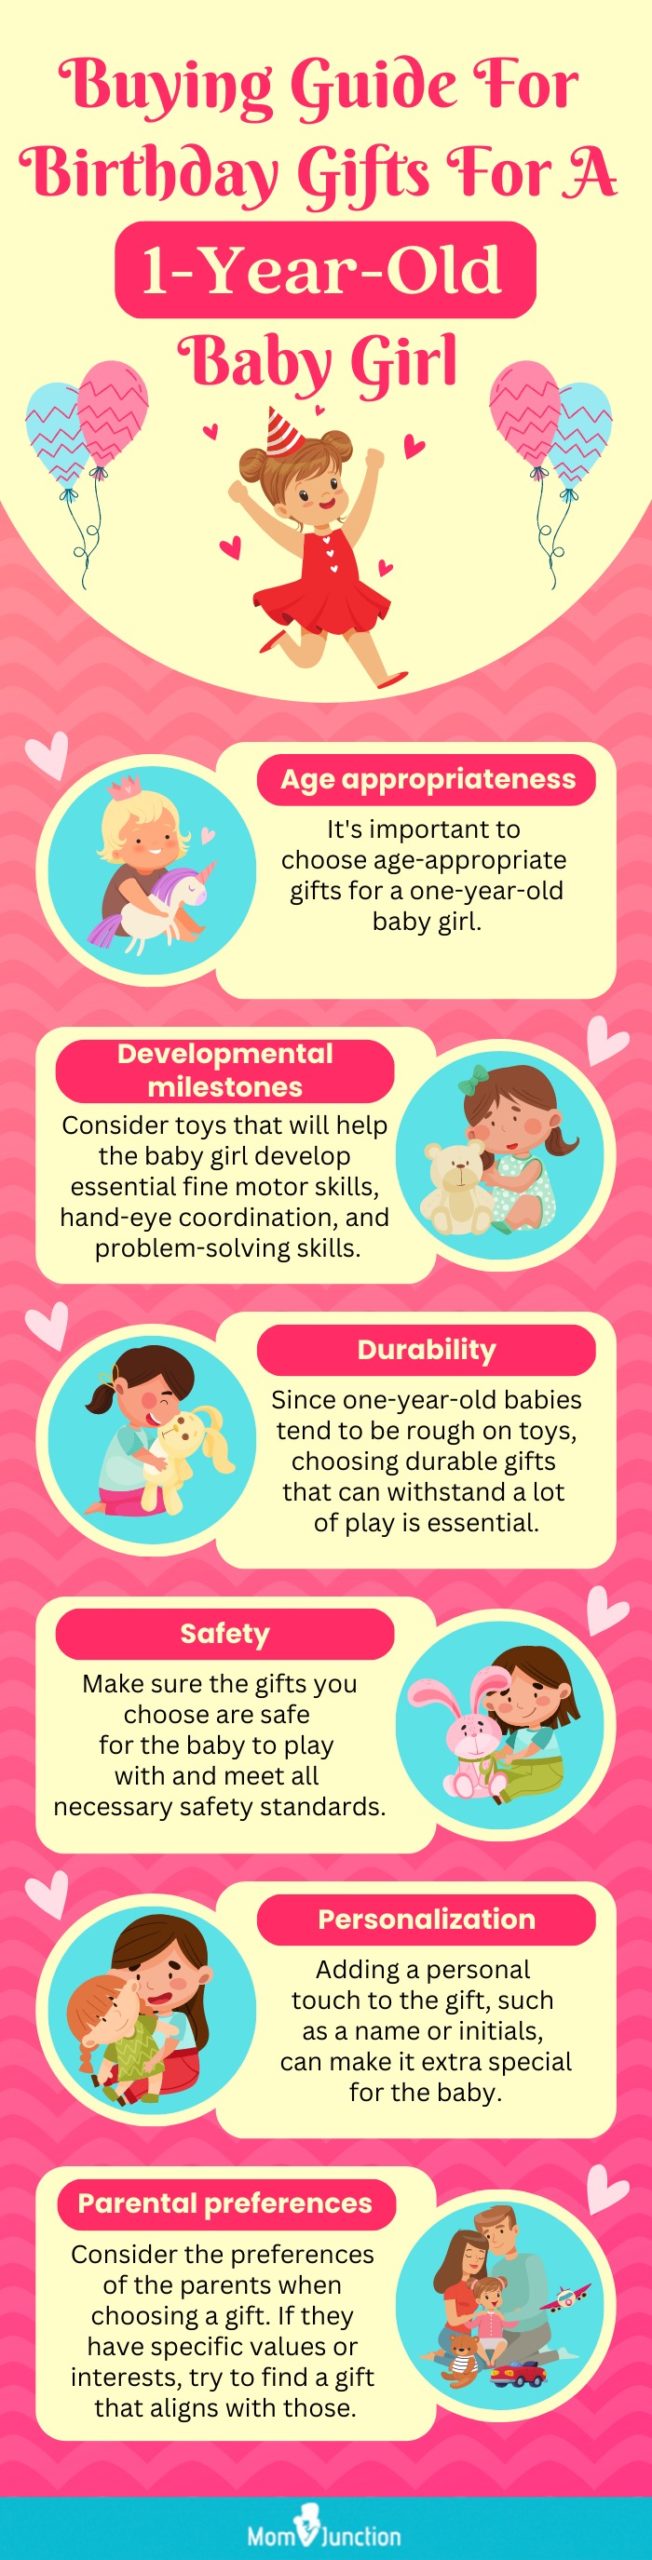 Buying Guide for Birthday Day Gift For A 1-Year Old Baby Girl (infographic)